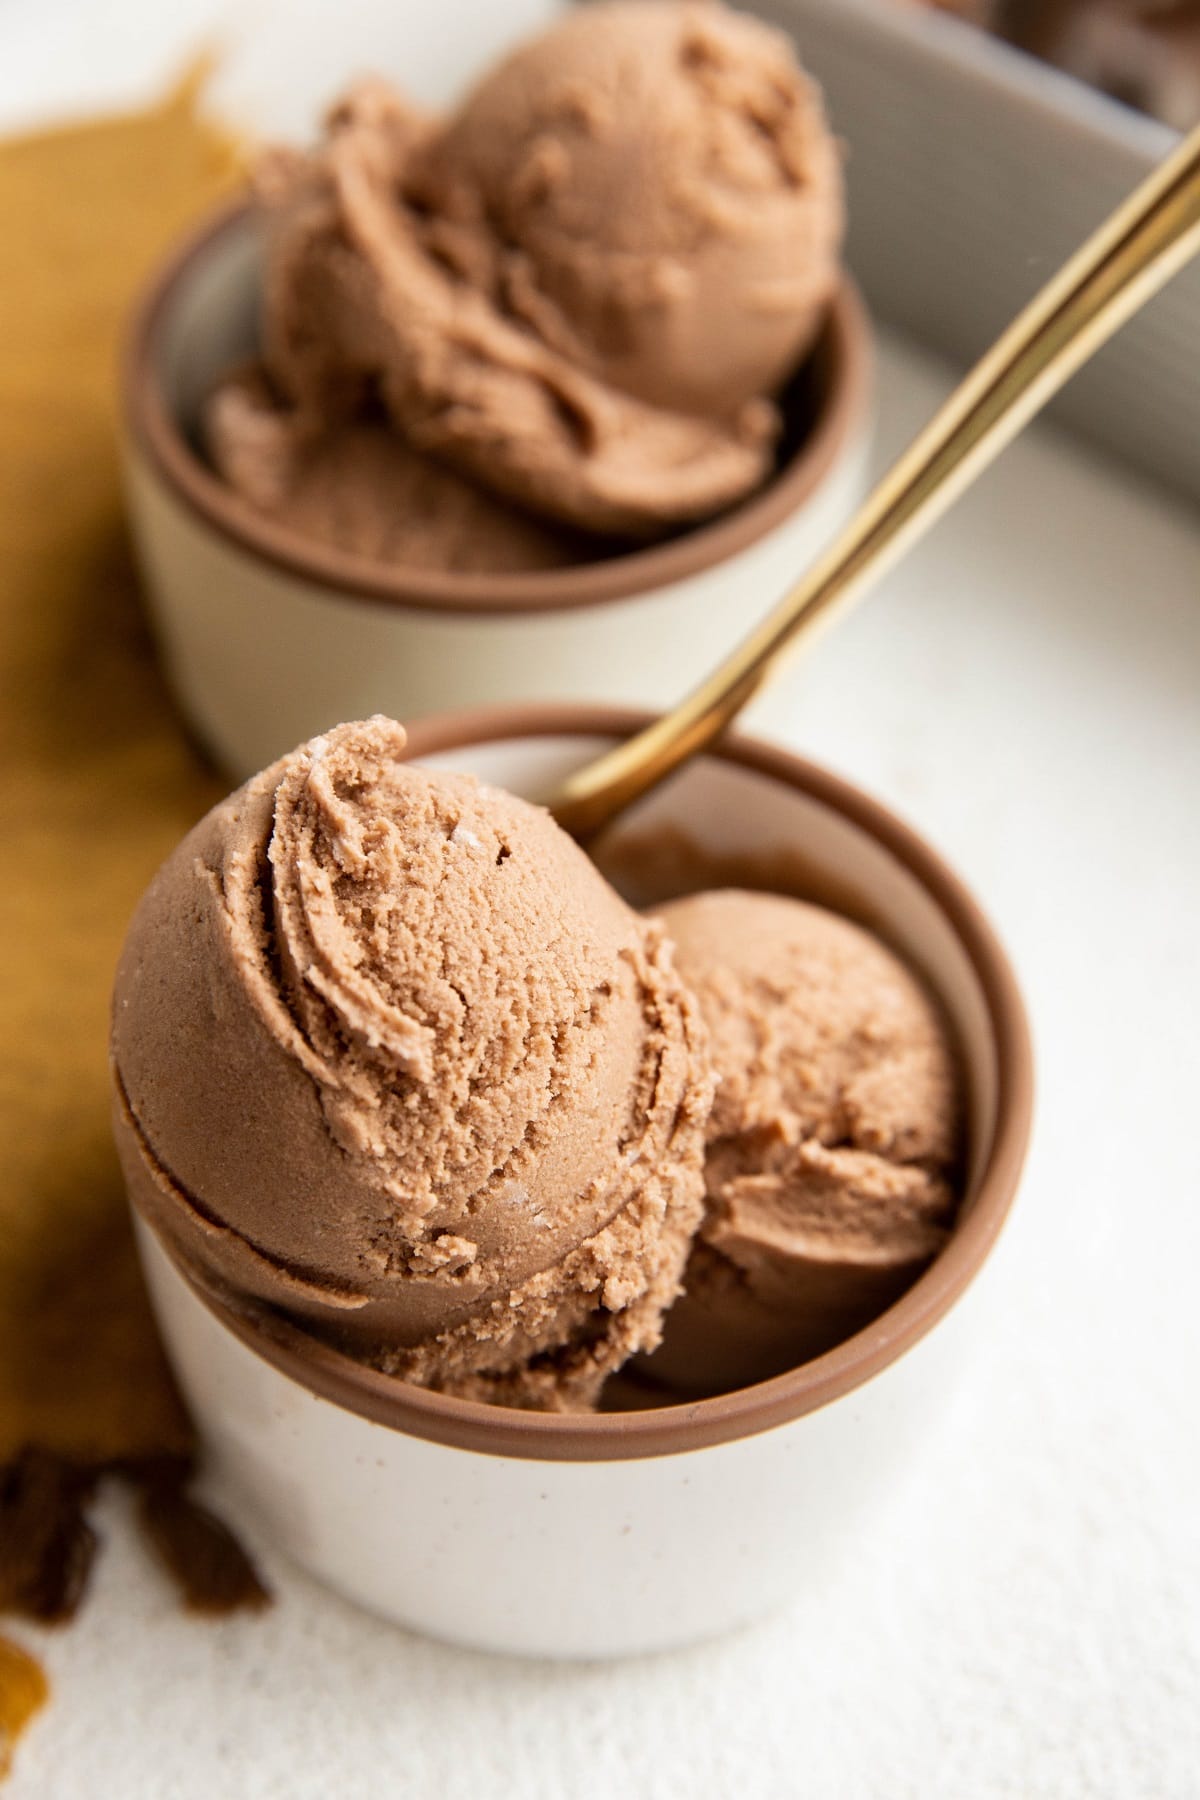 Two bowls of chocolate ice cream with a golden spoon.